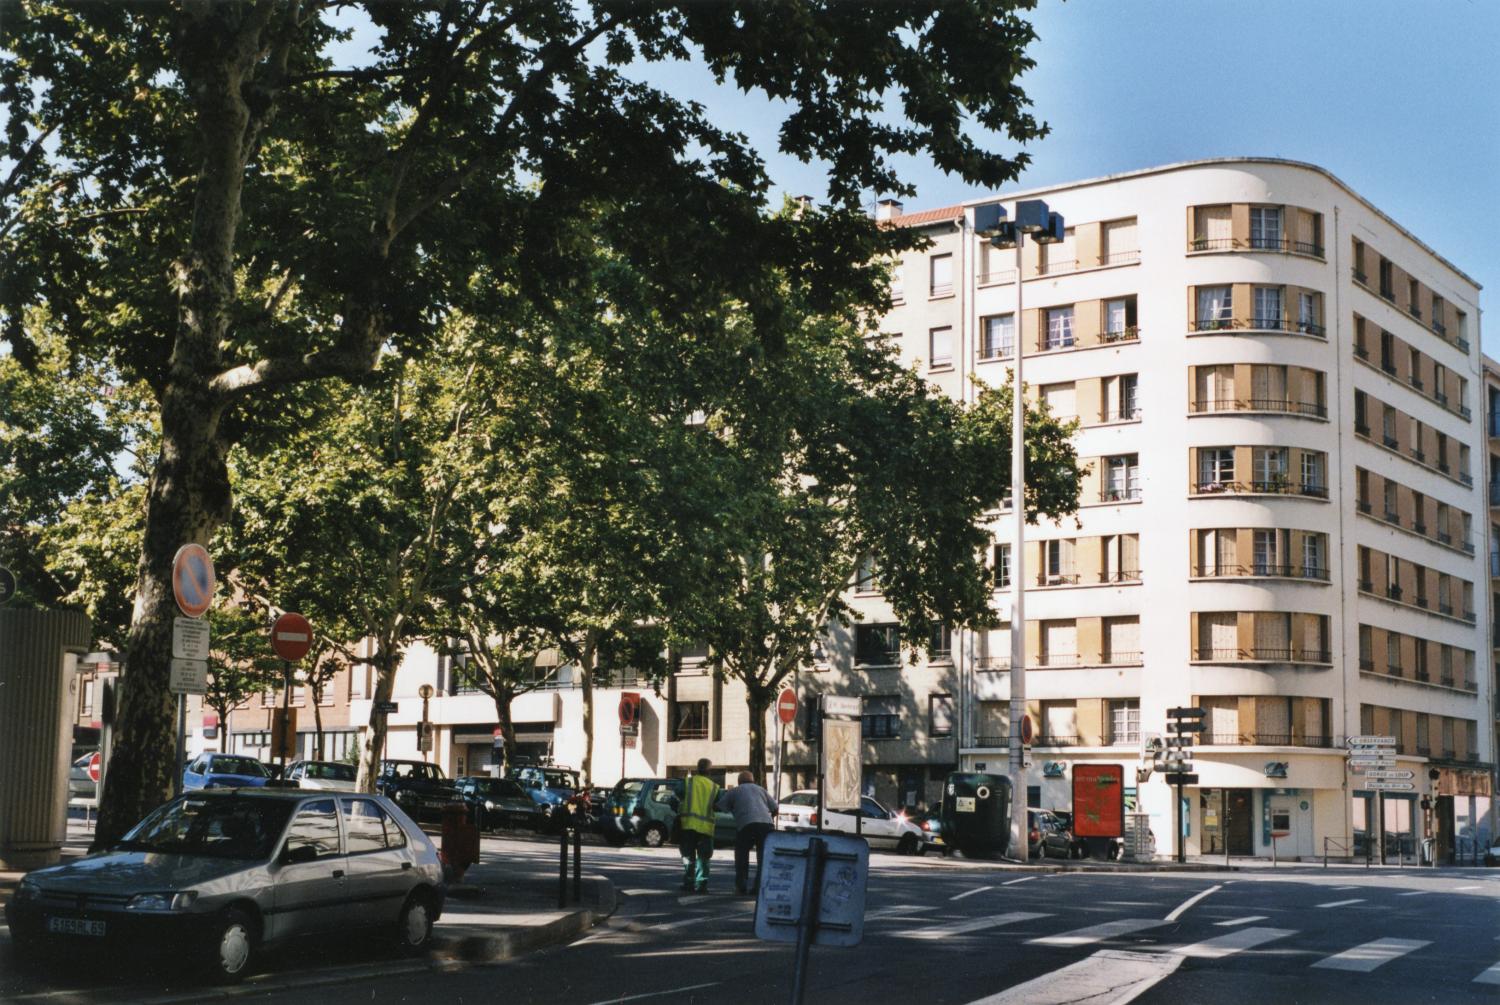 Place Alfred-Vanderpol